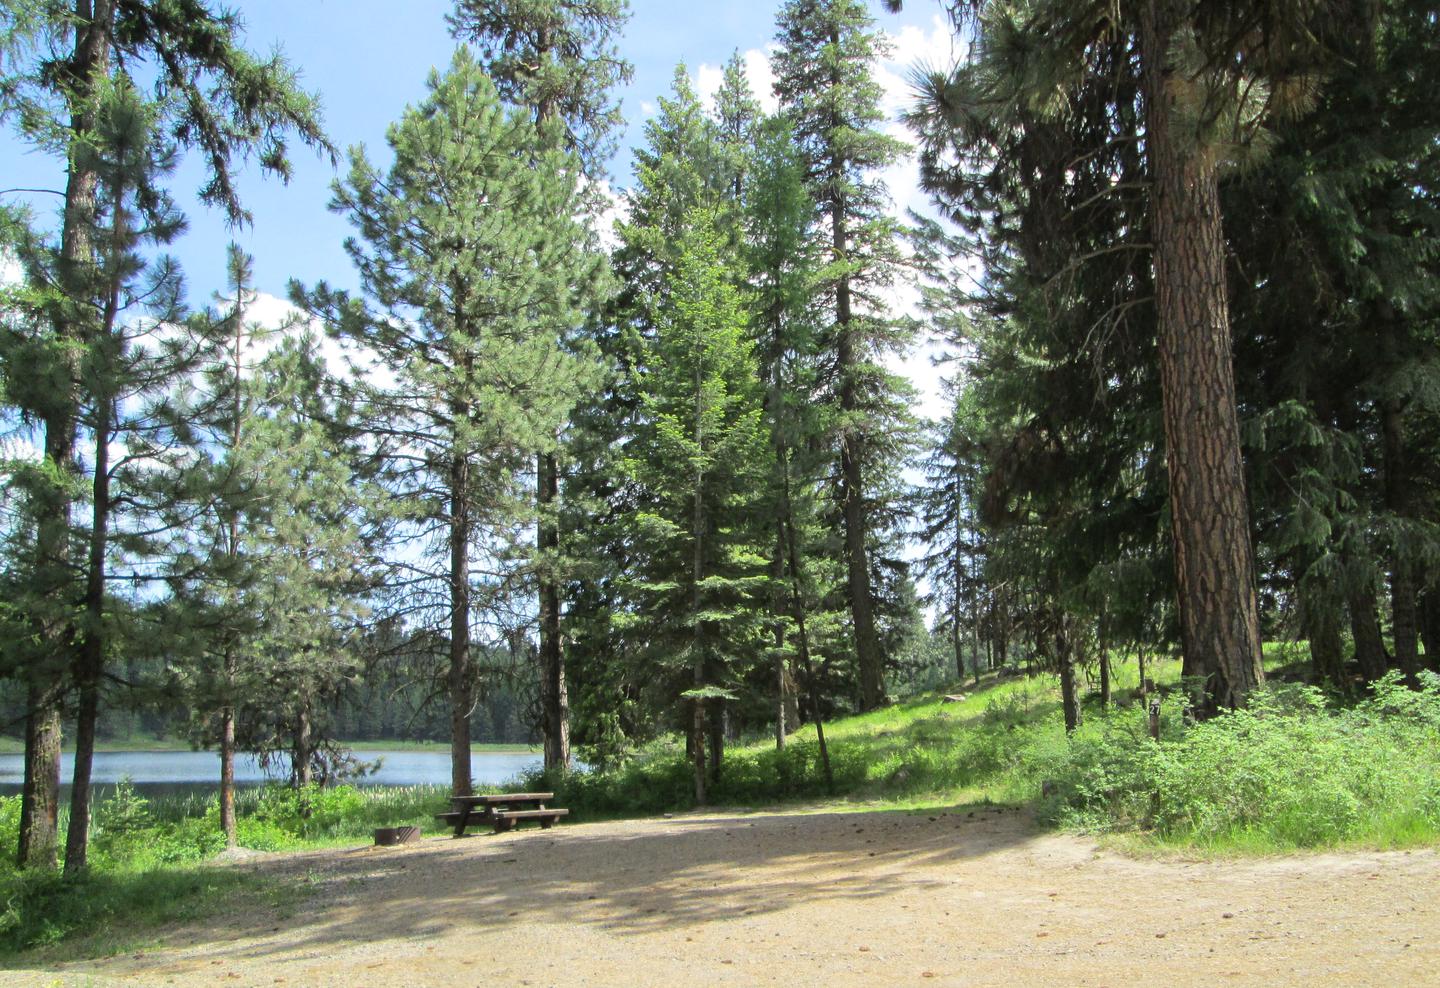 campsite parking area and entrance signBull Prairie Lake Campground site #27